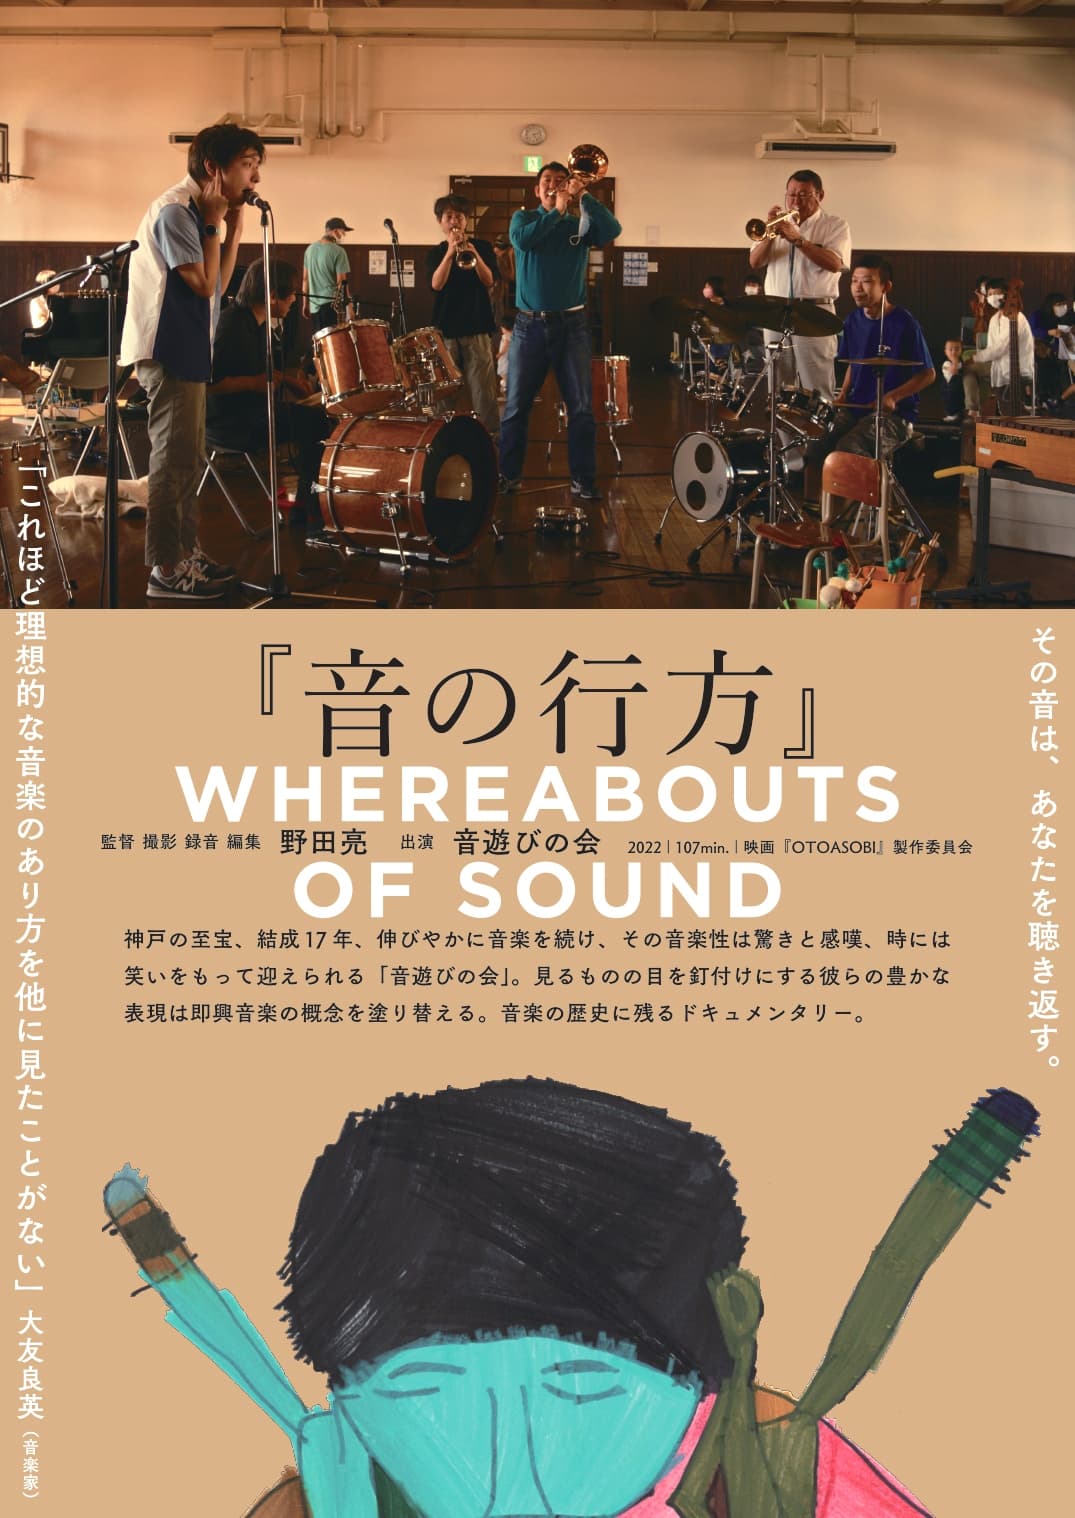 Whereabouts of Sound